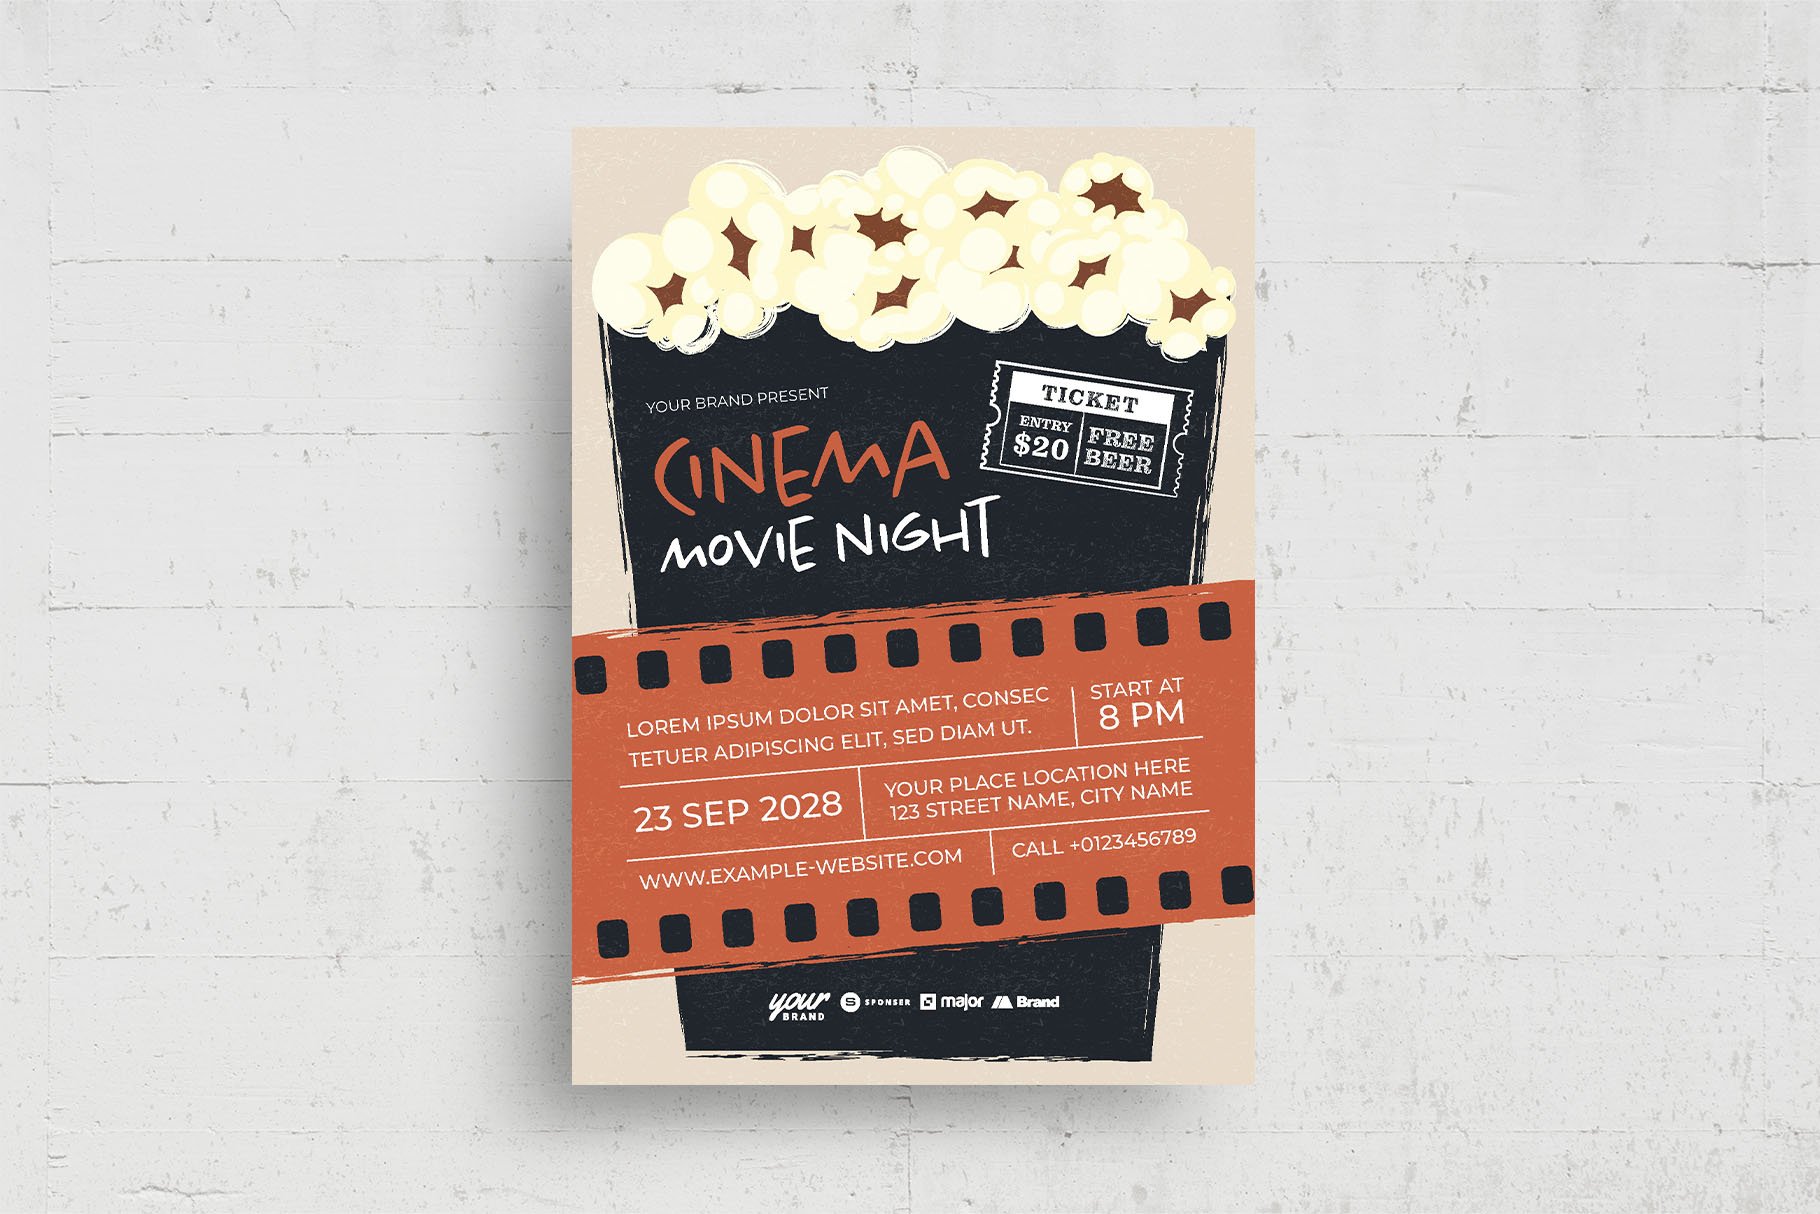 Cinema Night Flyer Template cover image.